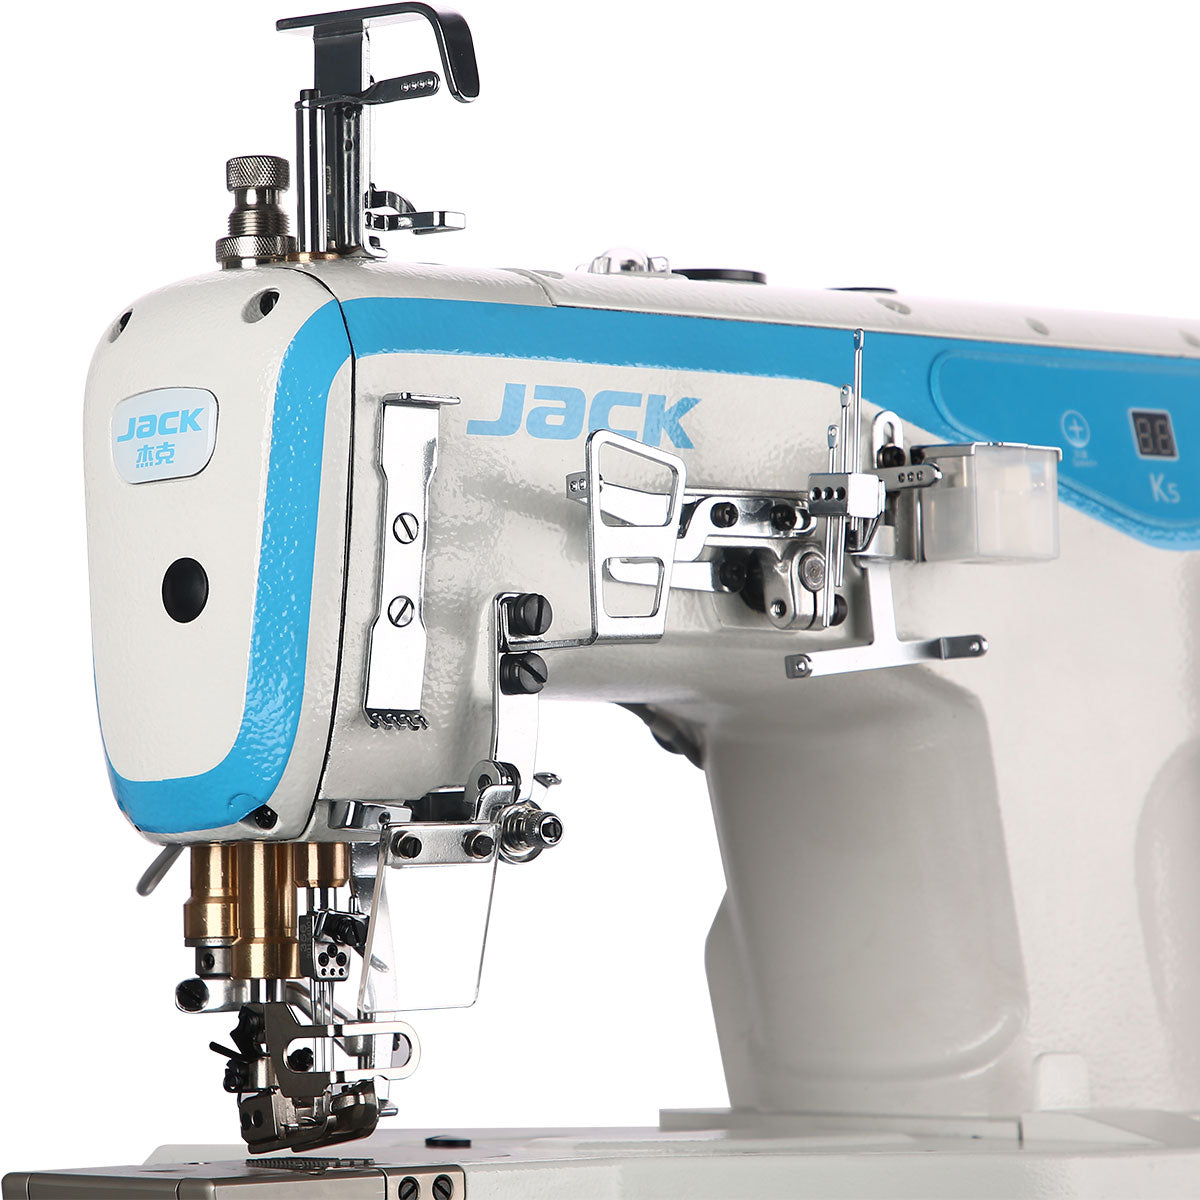 JACK K5-D-01GB×364 3 Needle Cylinder Arm Coverstitch Industrial Sewing Machine Assembled with Table and Stand Included